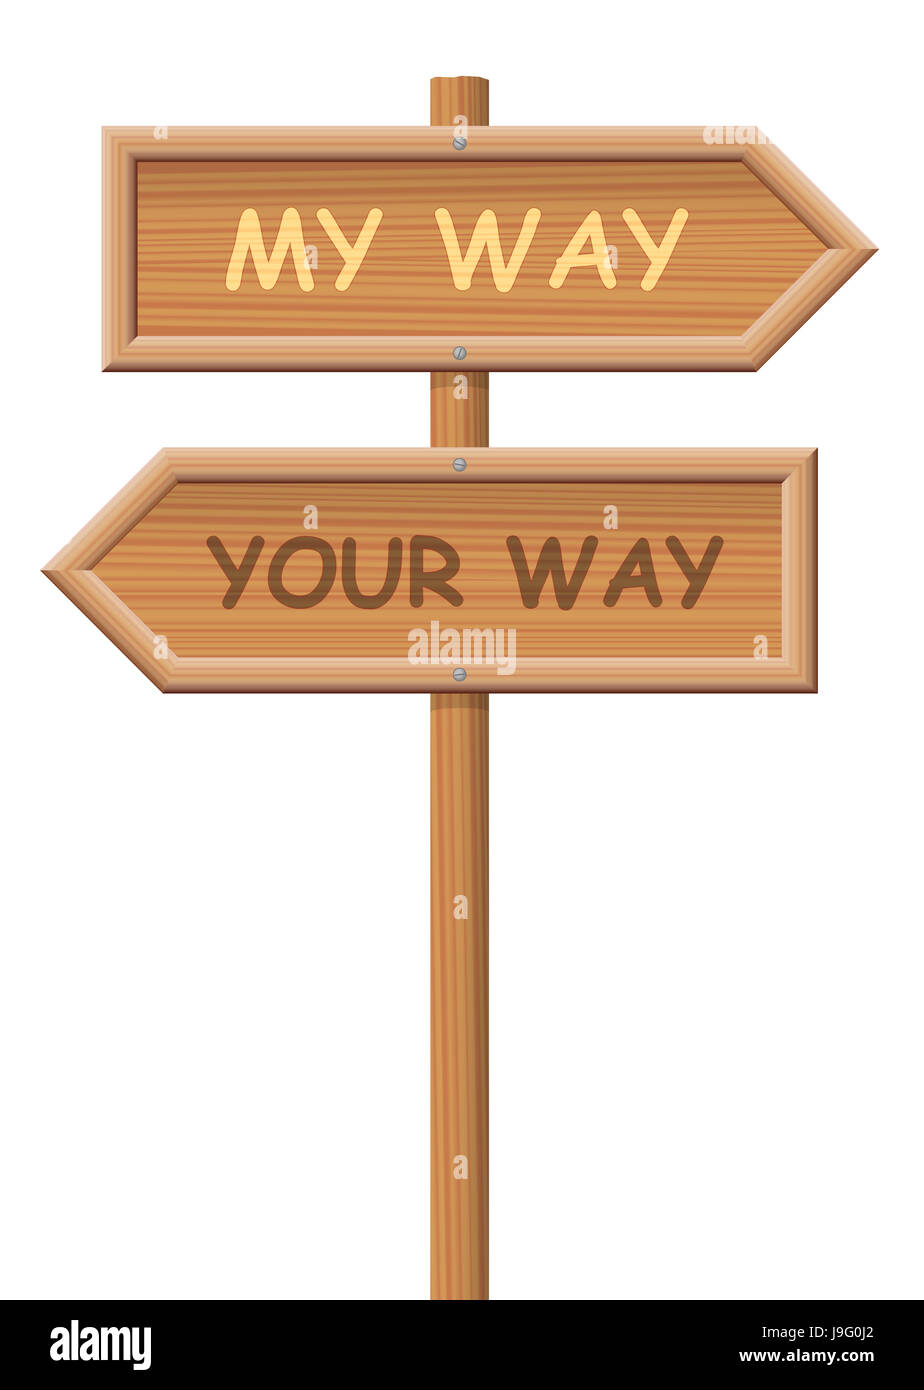 Go your own way. Signpost, that says MY WAY and YOUR WAY, as a symbol for going separate ways, different routes, opposite directions. Stock Photo